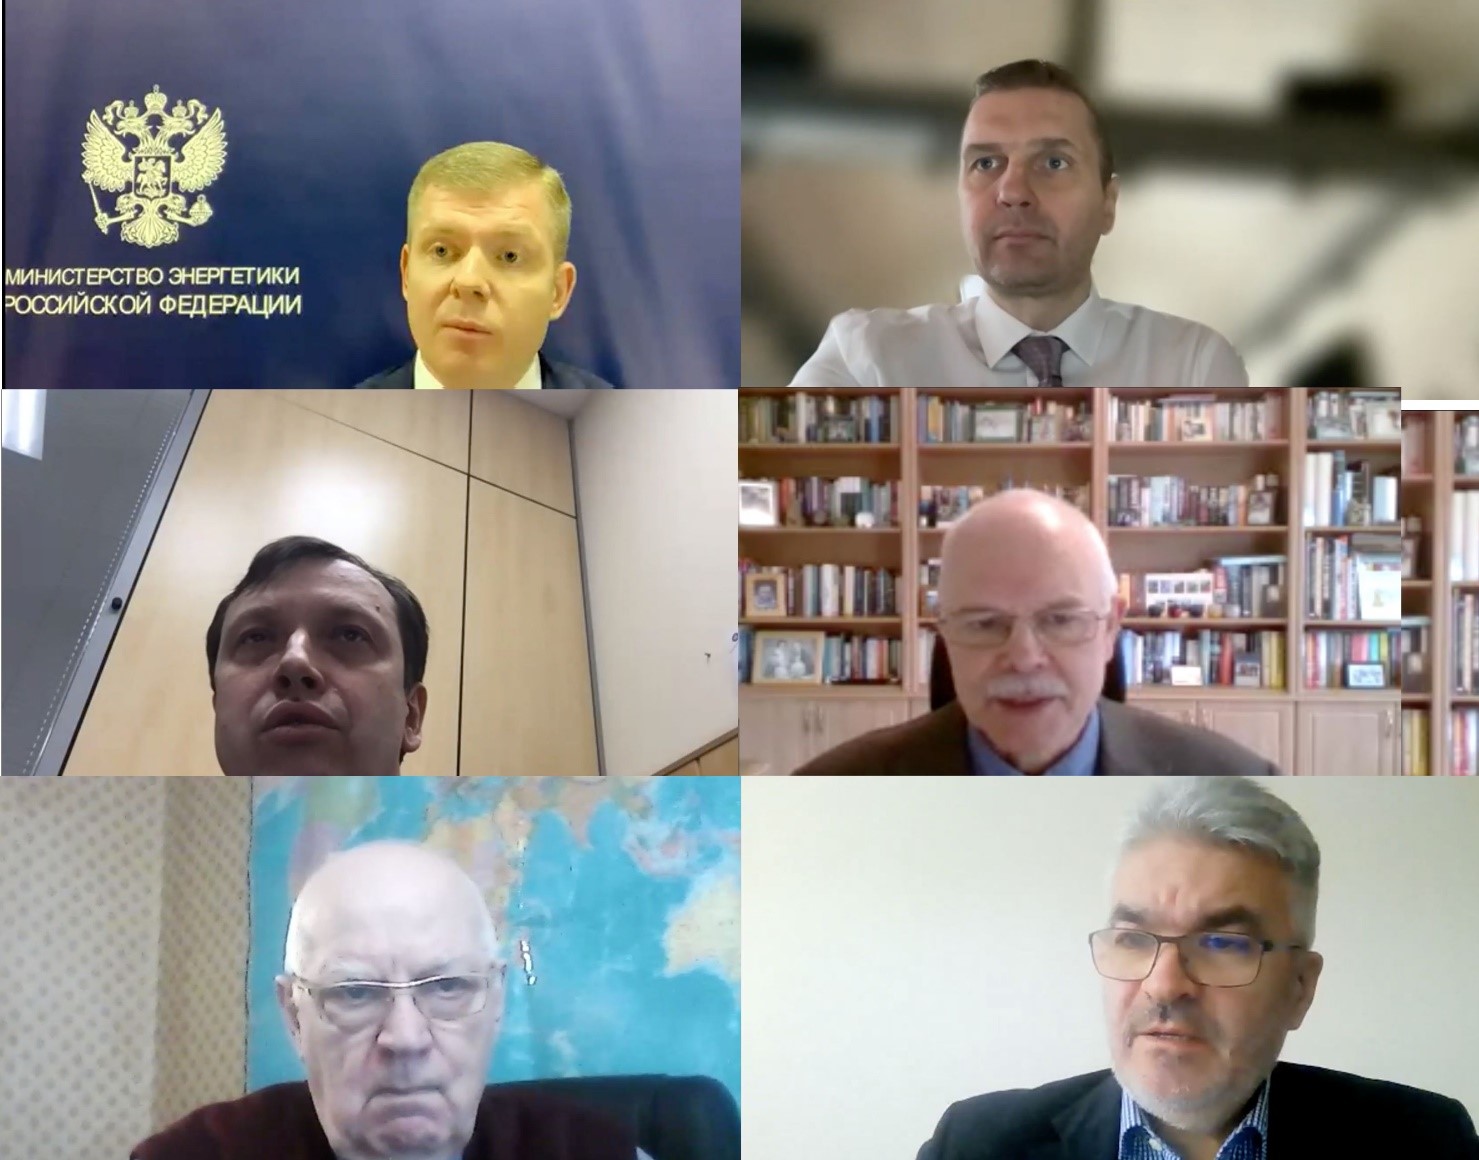 Energy sector decarbonisation in the era of pandemic discussed on the platform of the WEC Russian National Committee 